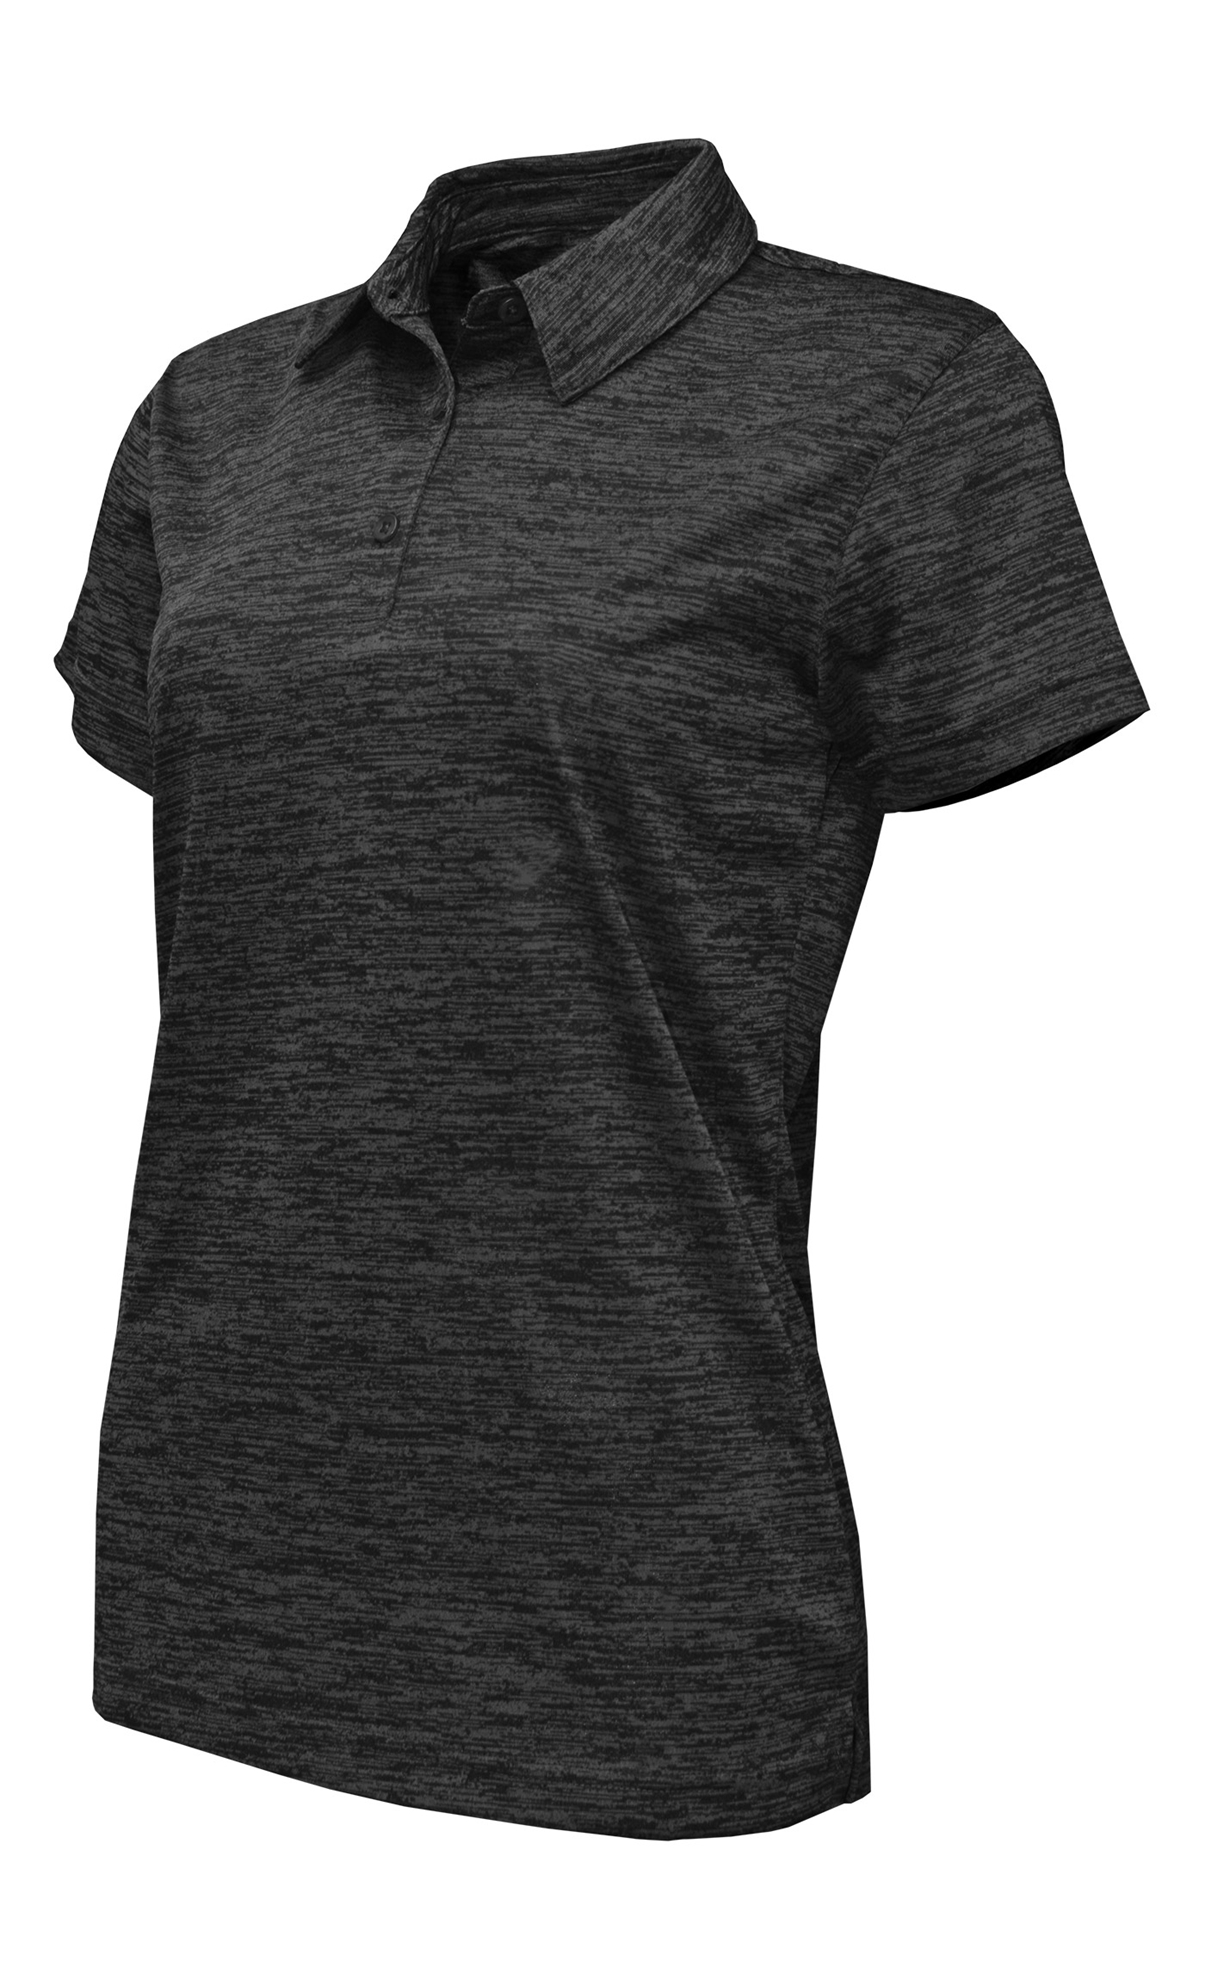 BAW Athletic Wear DT11 - Ladies Vintage Polo